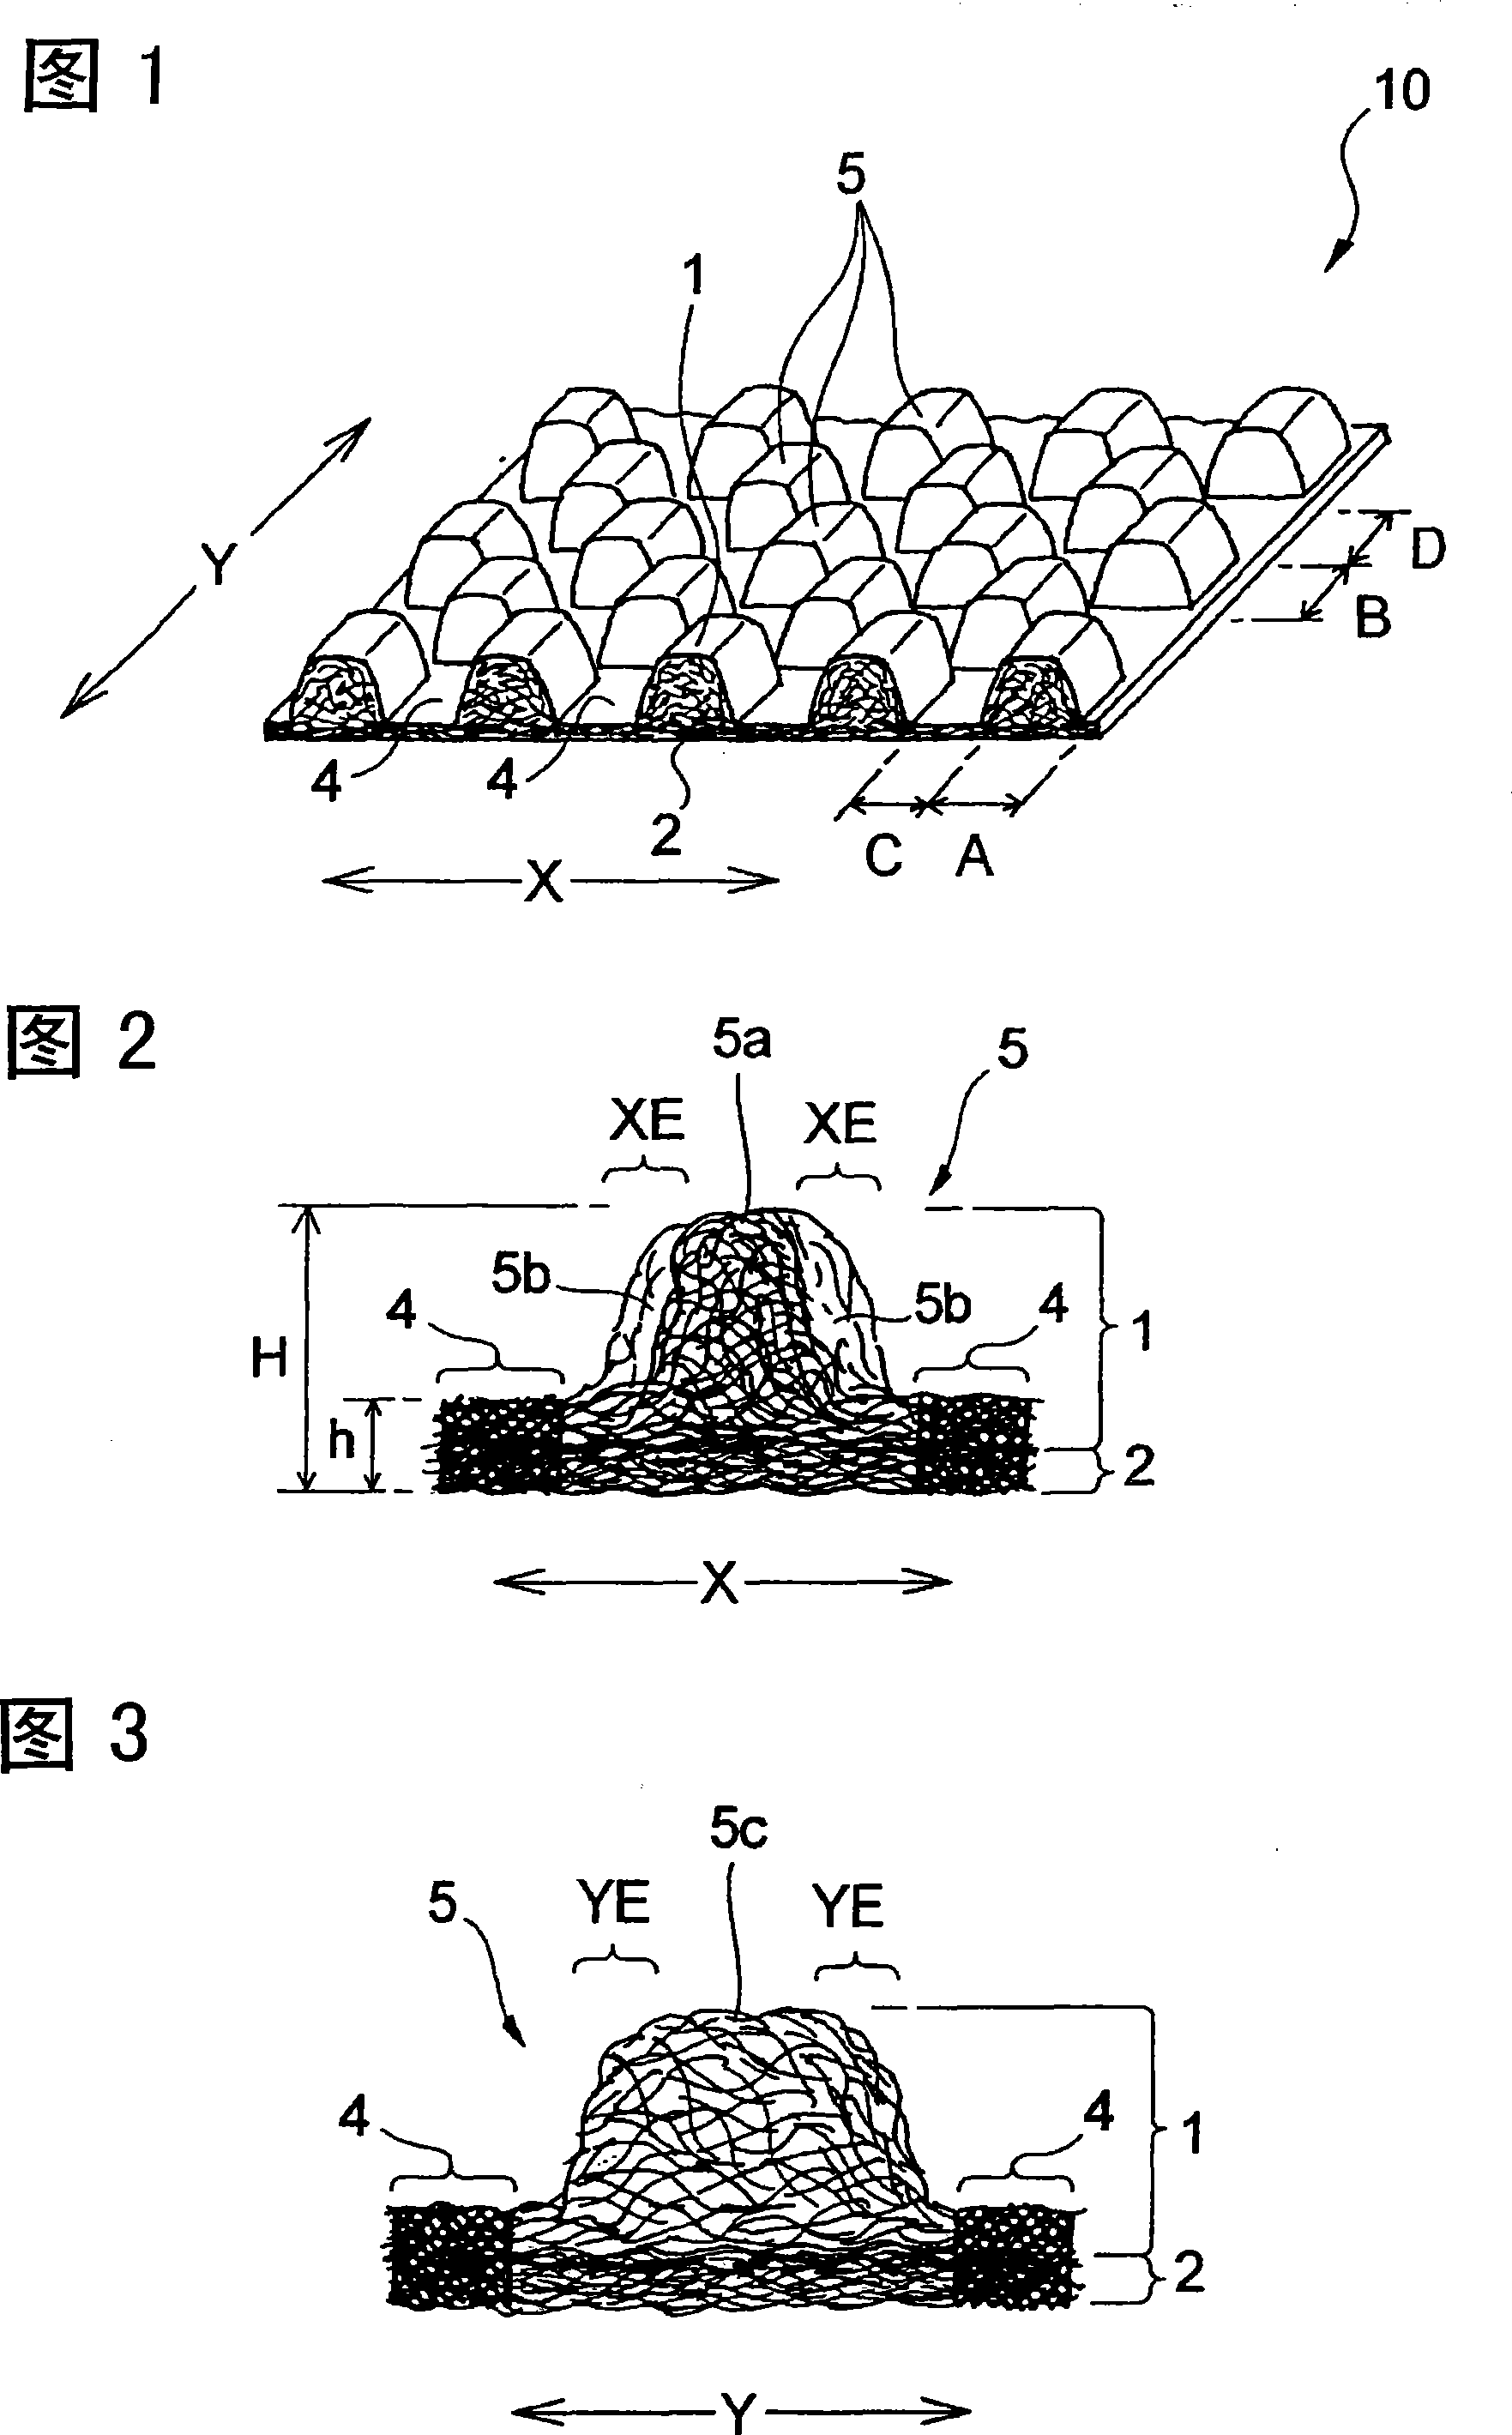 Face sheet for absorption article and method for producing the same